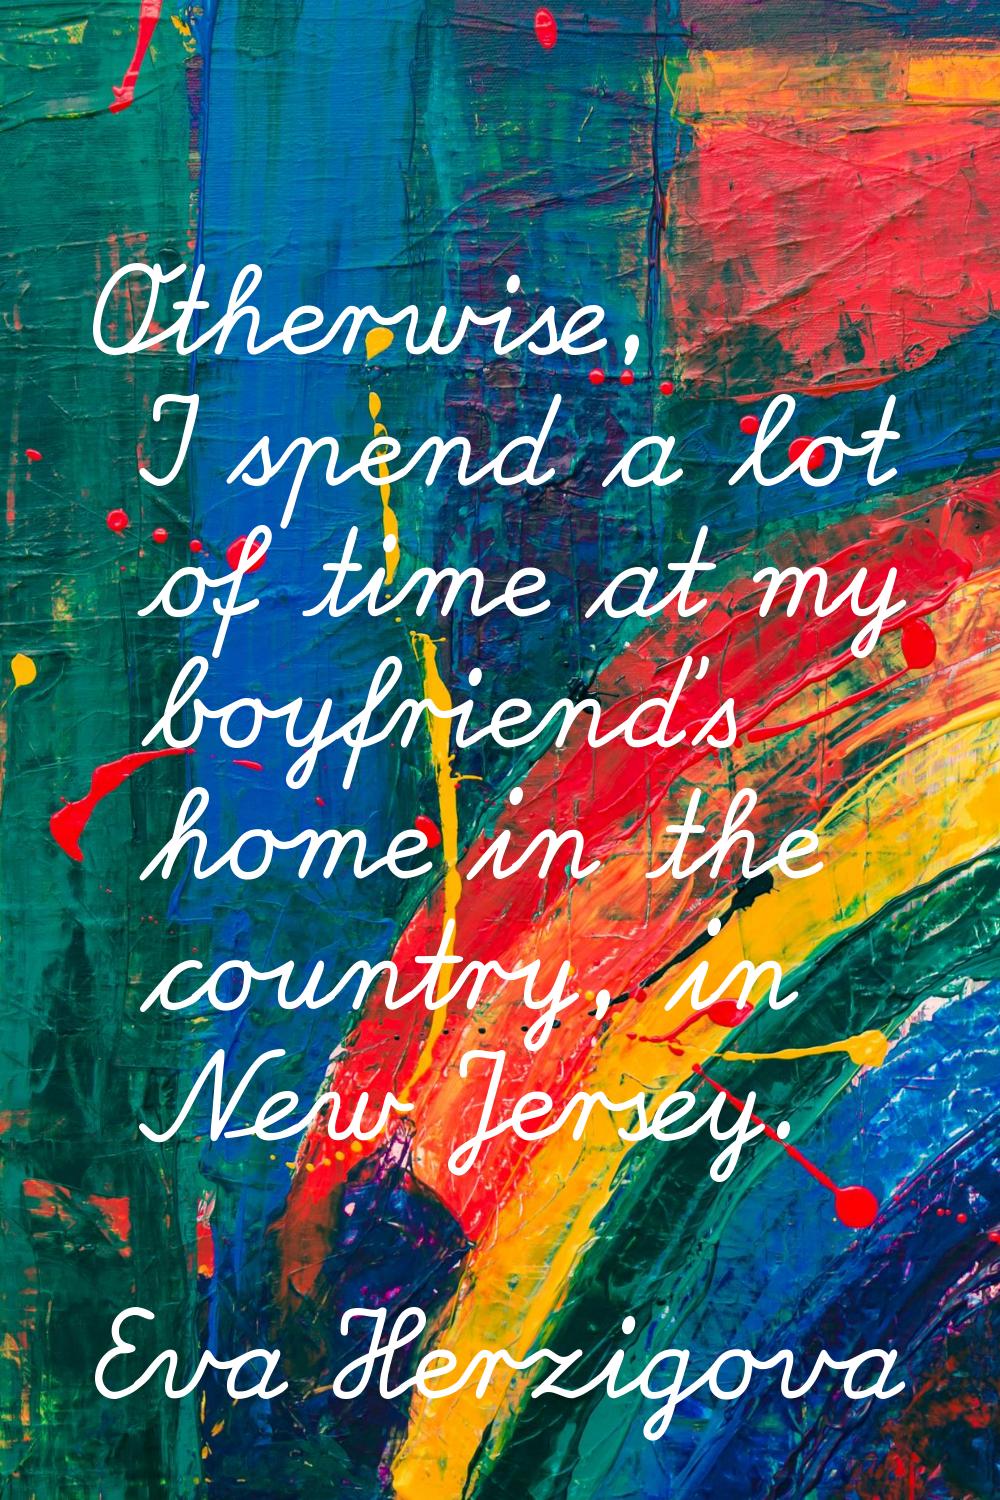 Otherwise, I spend a lot of time at my boyfriend's home in the country, in New Jersey.